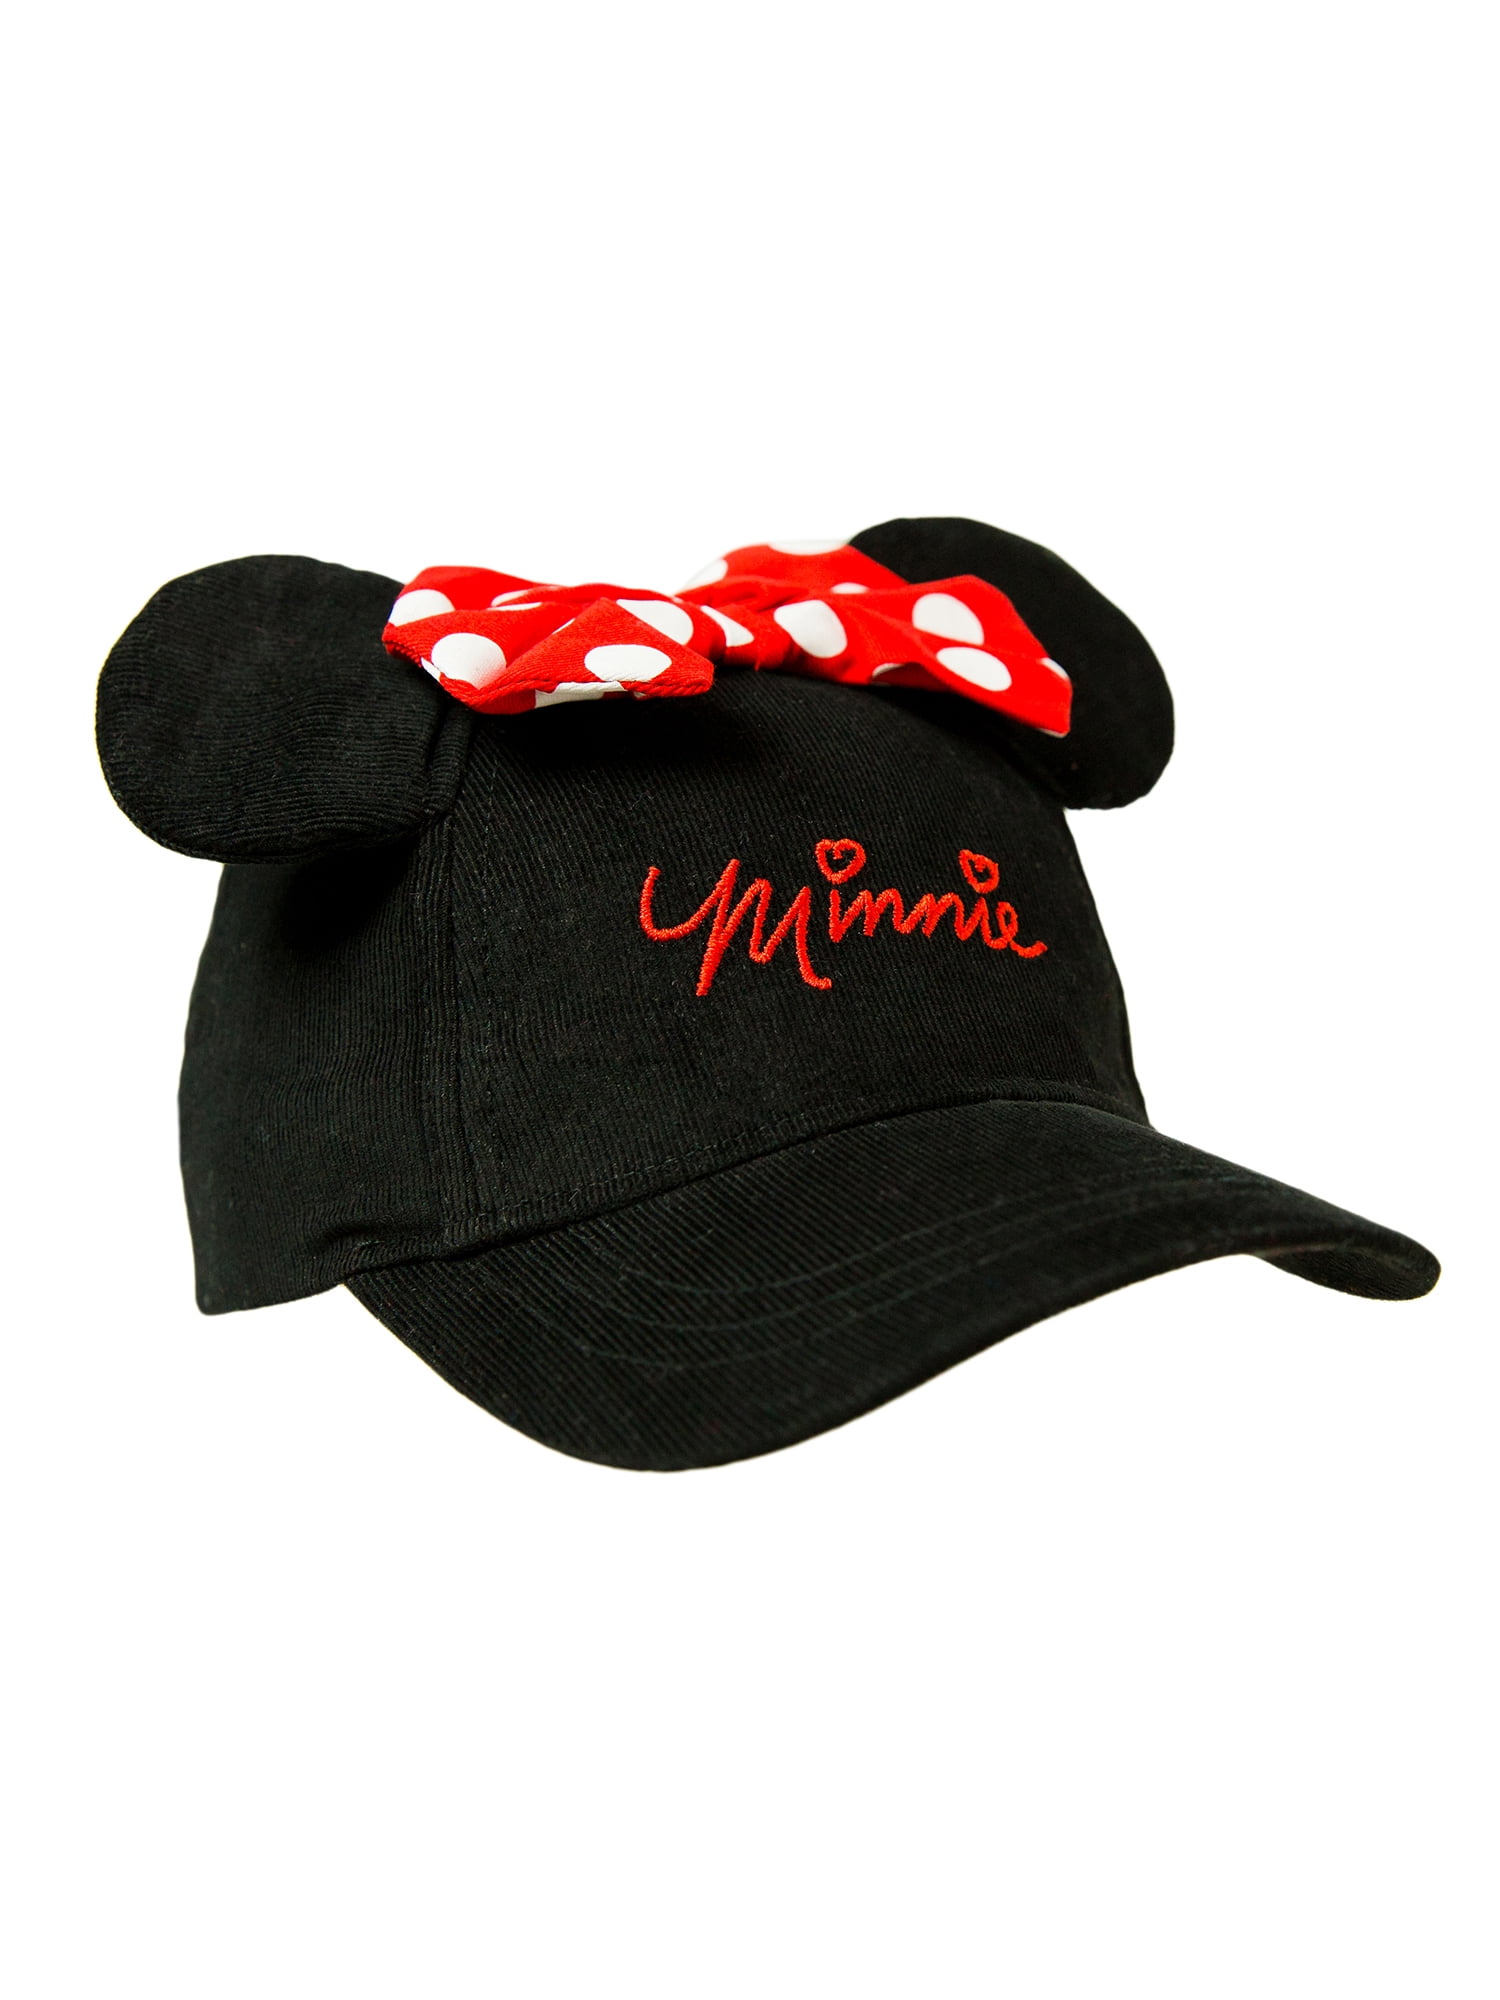 DISNEY MINNIE MOUSE Infant Baby Adjustable Baseball Cap Hat Blue Red Bow NEW NWT 